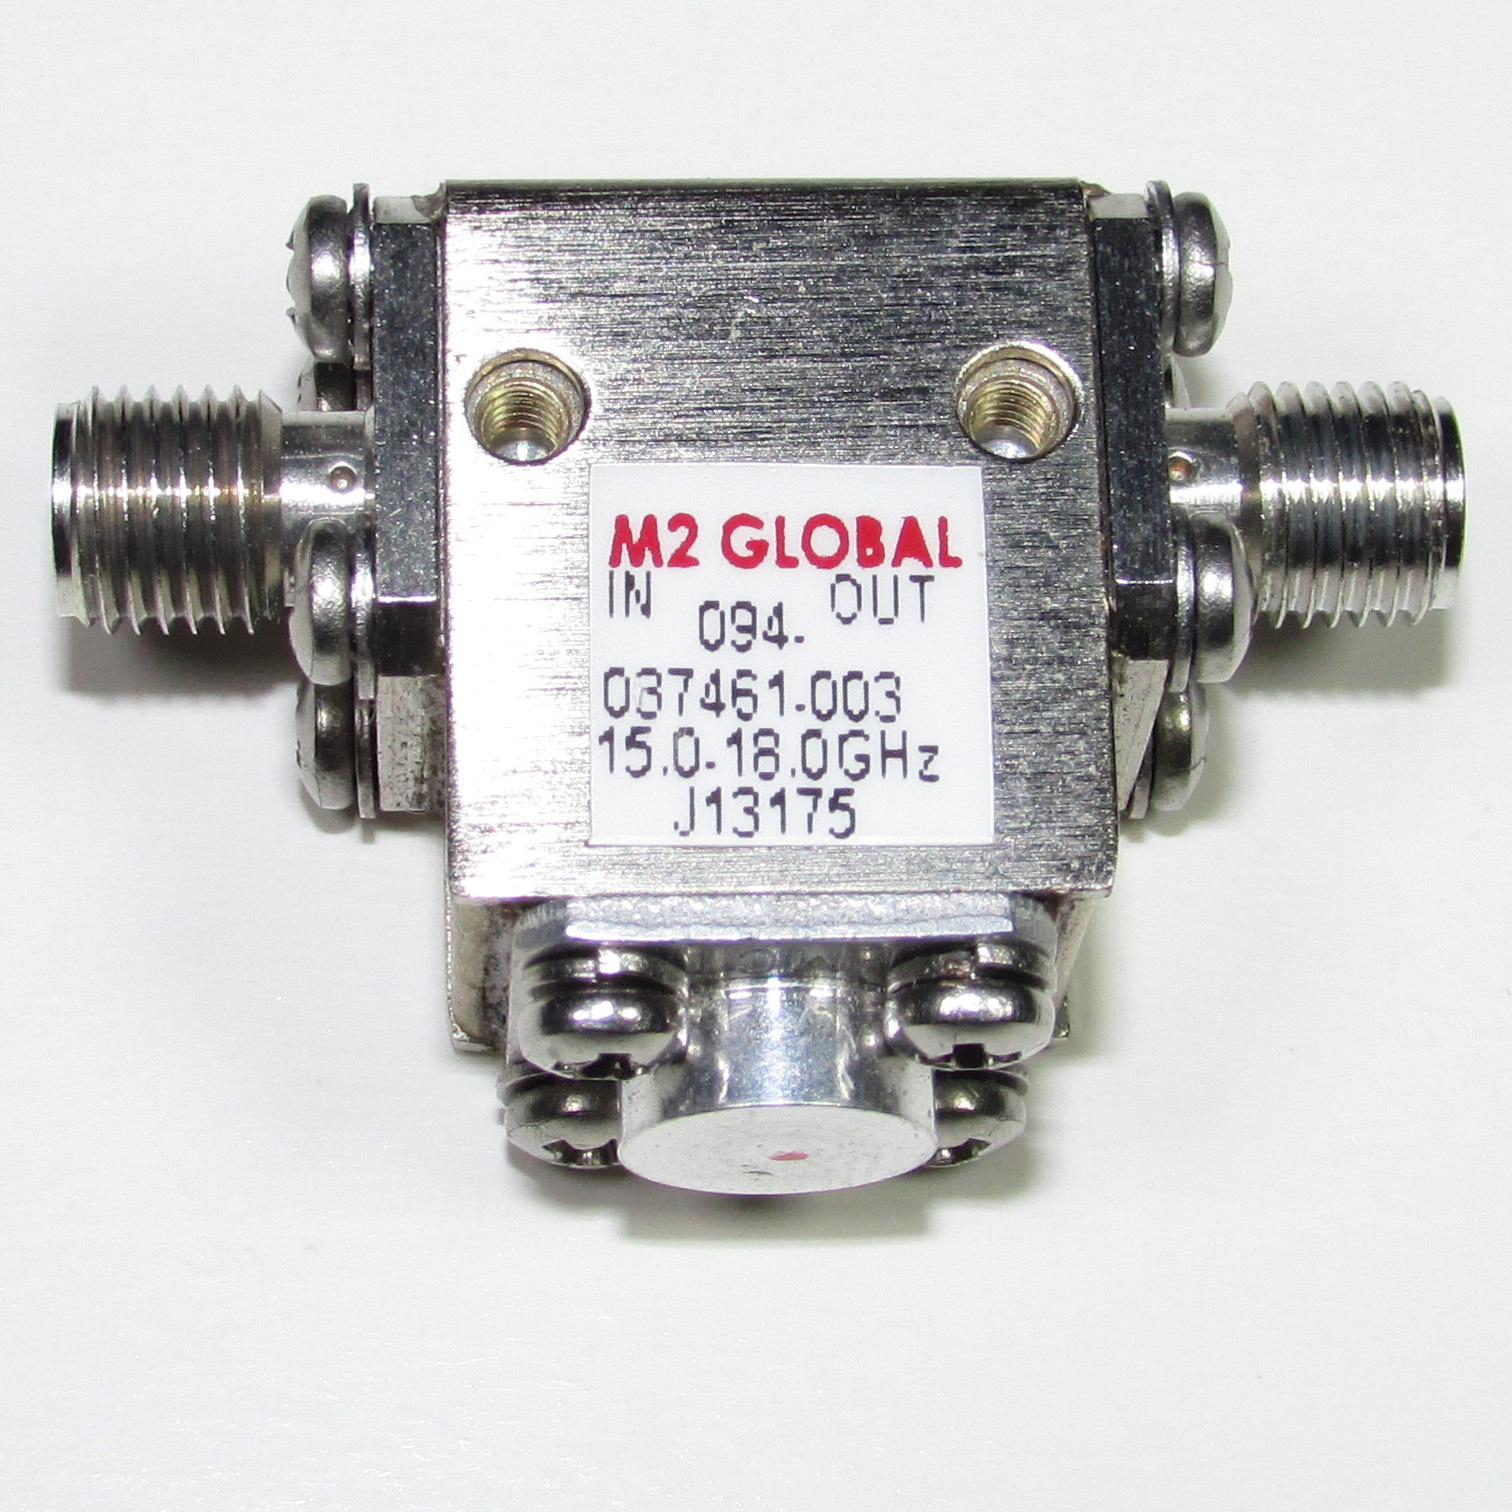 M2 GLOBAL 15-18GHz SMA microwave coaxial isolator